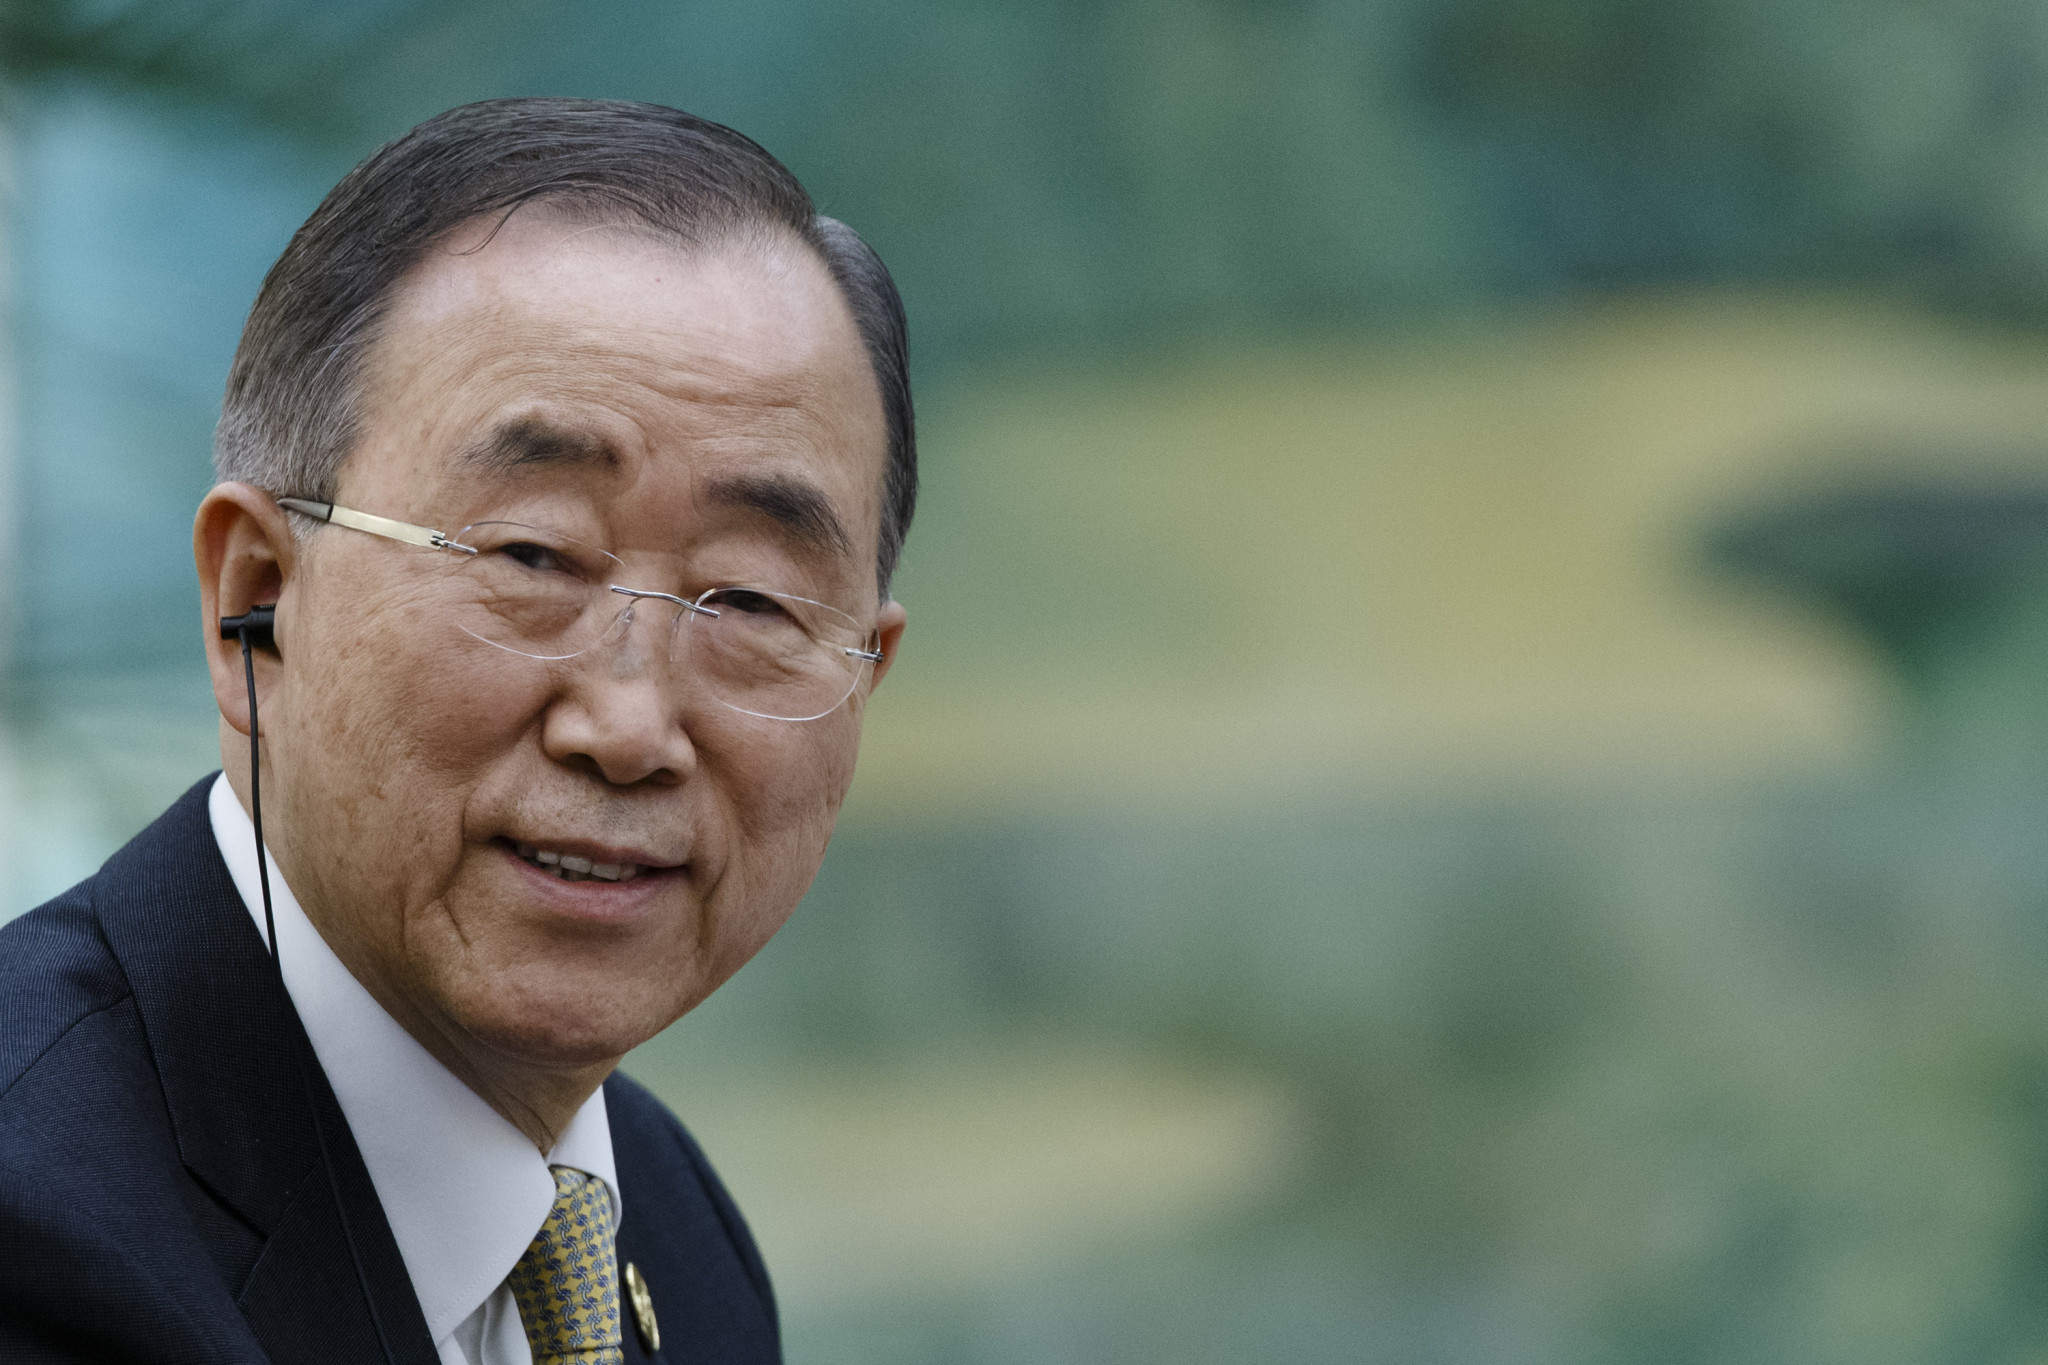 The IOC Ethics Commission is chaired by former United States Secretary-General Ban Ki-moon ©Getty Images